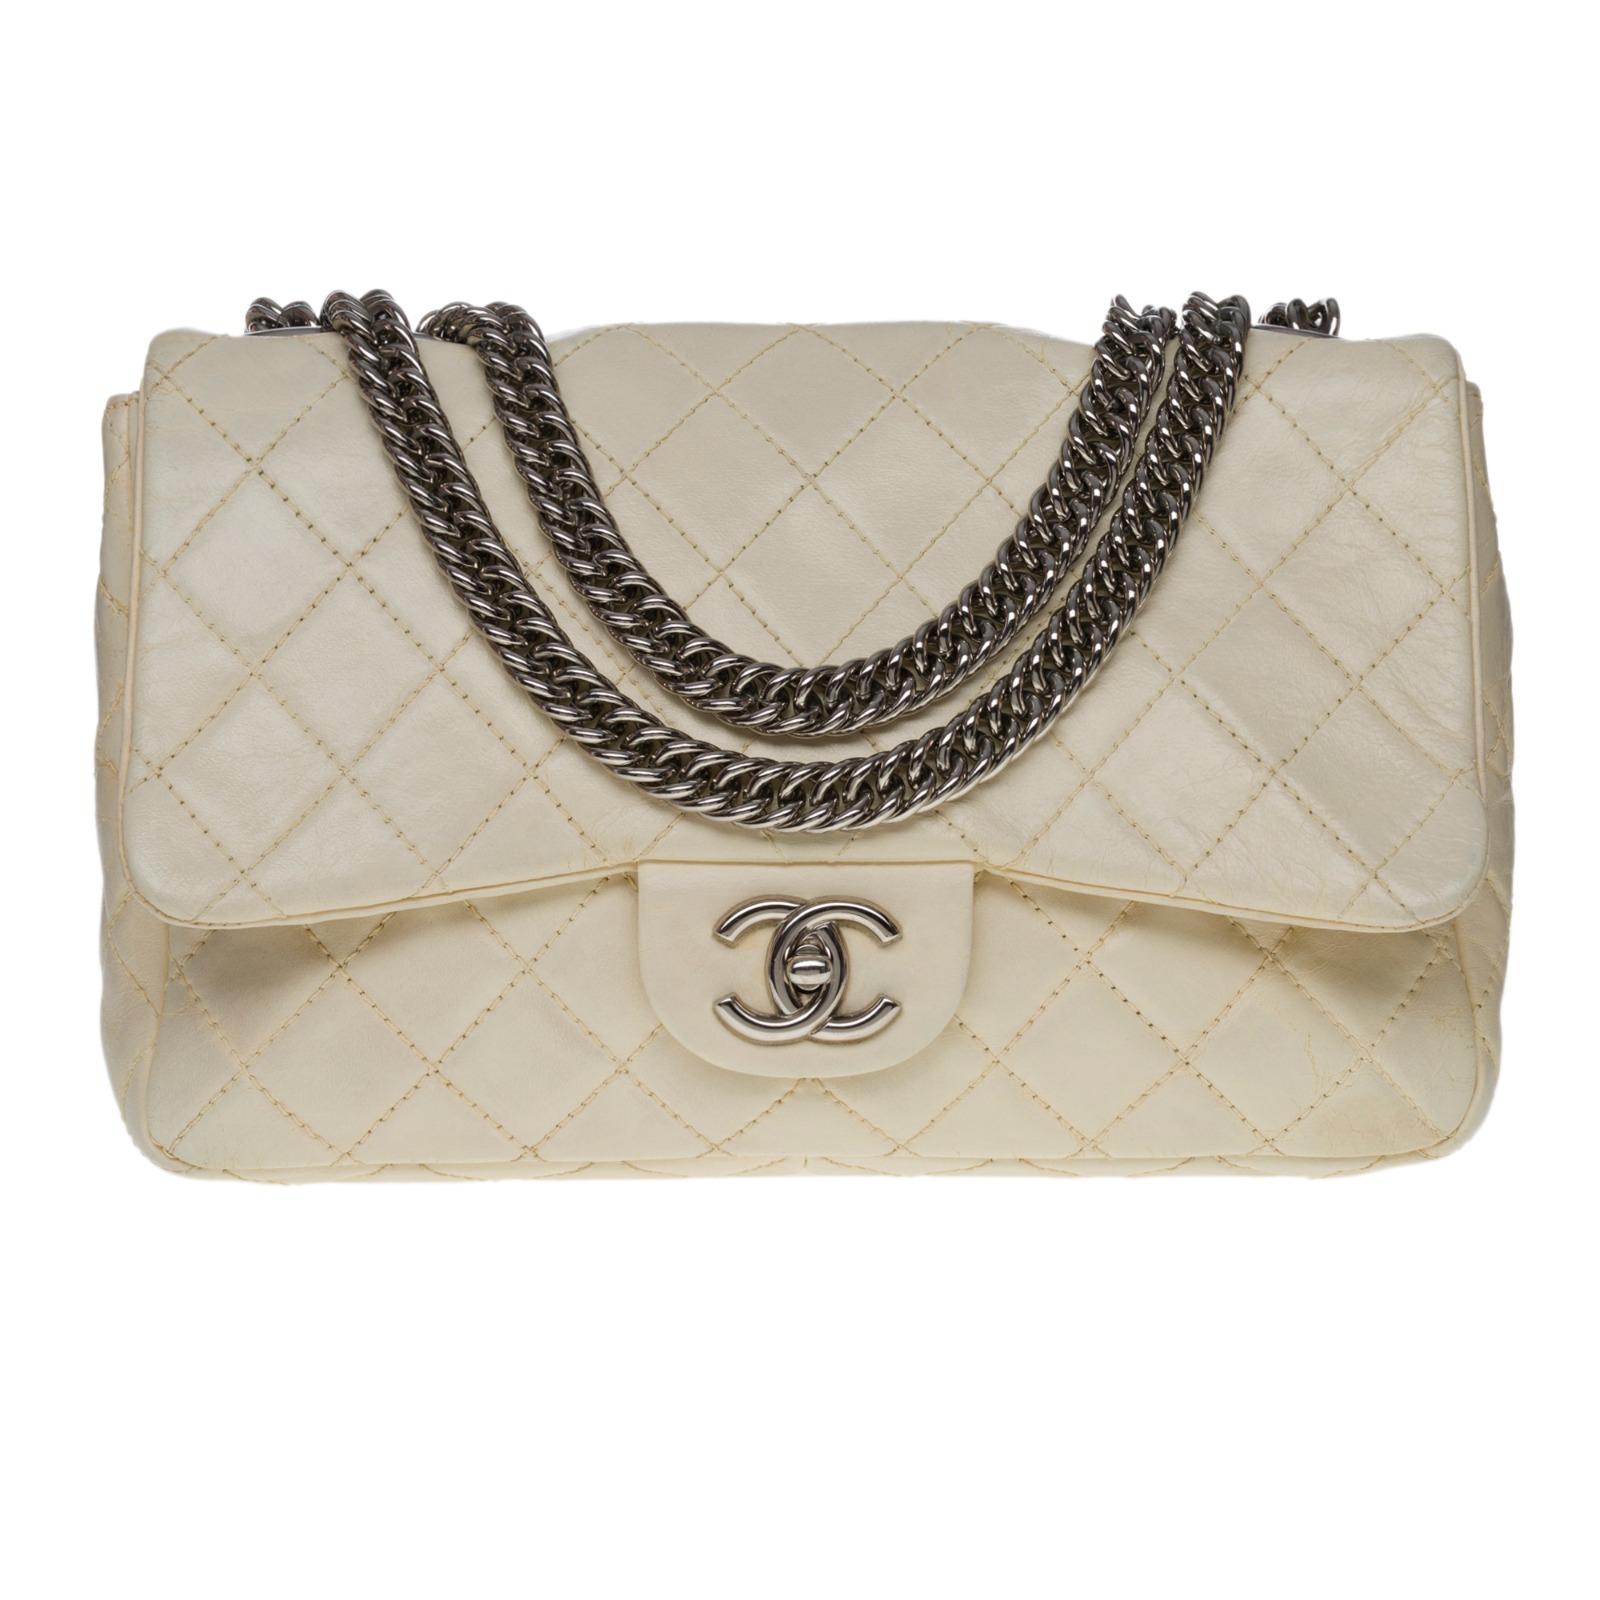 Majestic Chanel Timeless/Classique Jumbo Flap bag handbag in ecru quilted lambskin, hardware in silver metal, snake chain in silver metal allowing the bag to be worn on the shoulder and accross the body

Patch pocket on the back of the bag
Flap